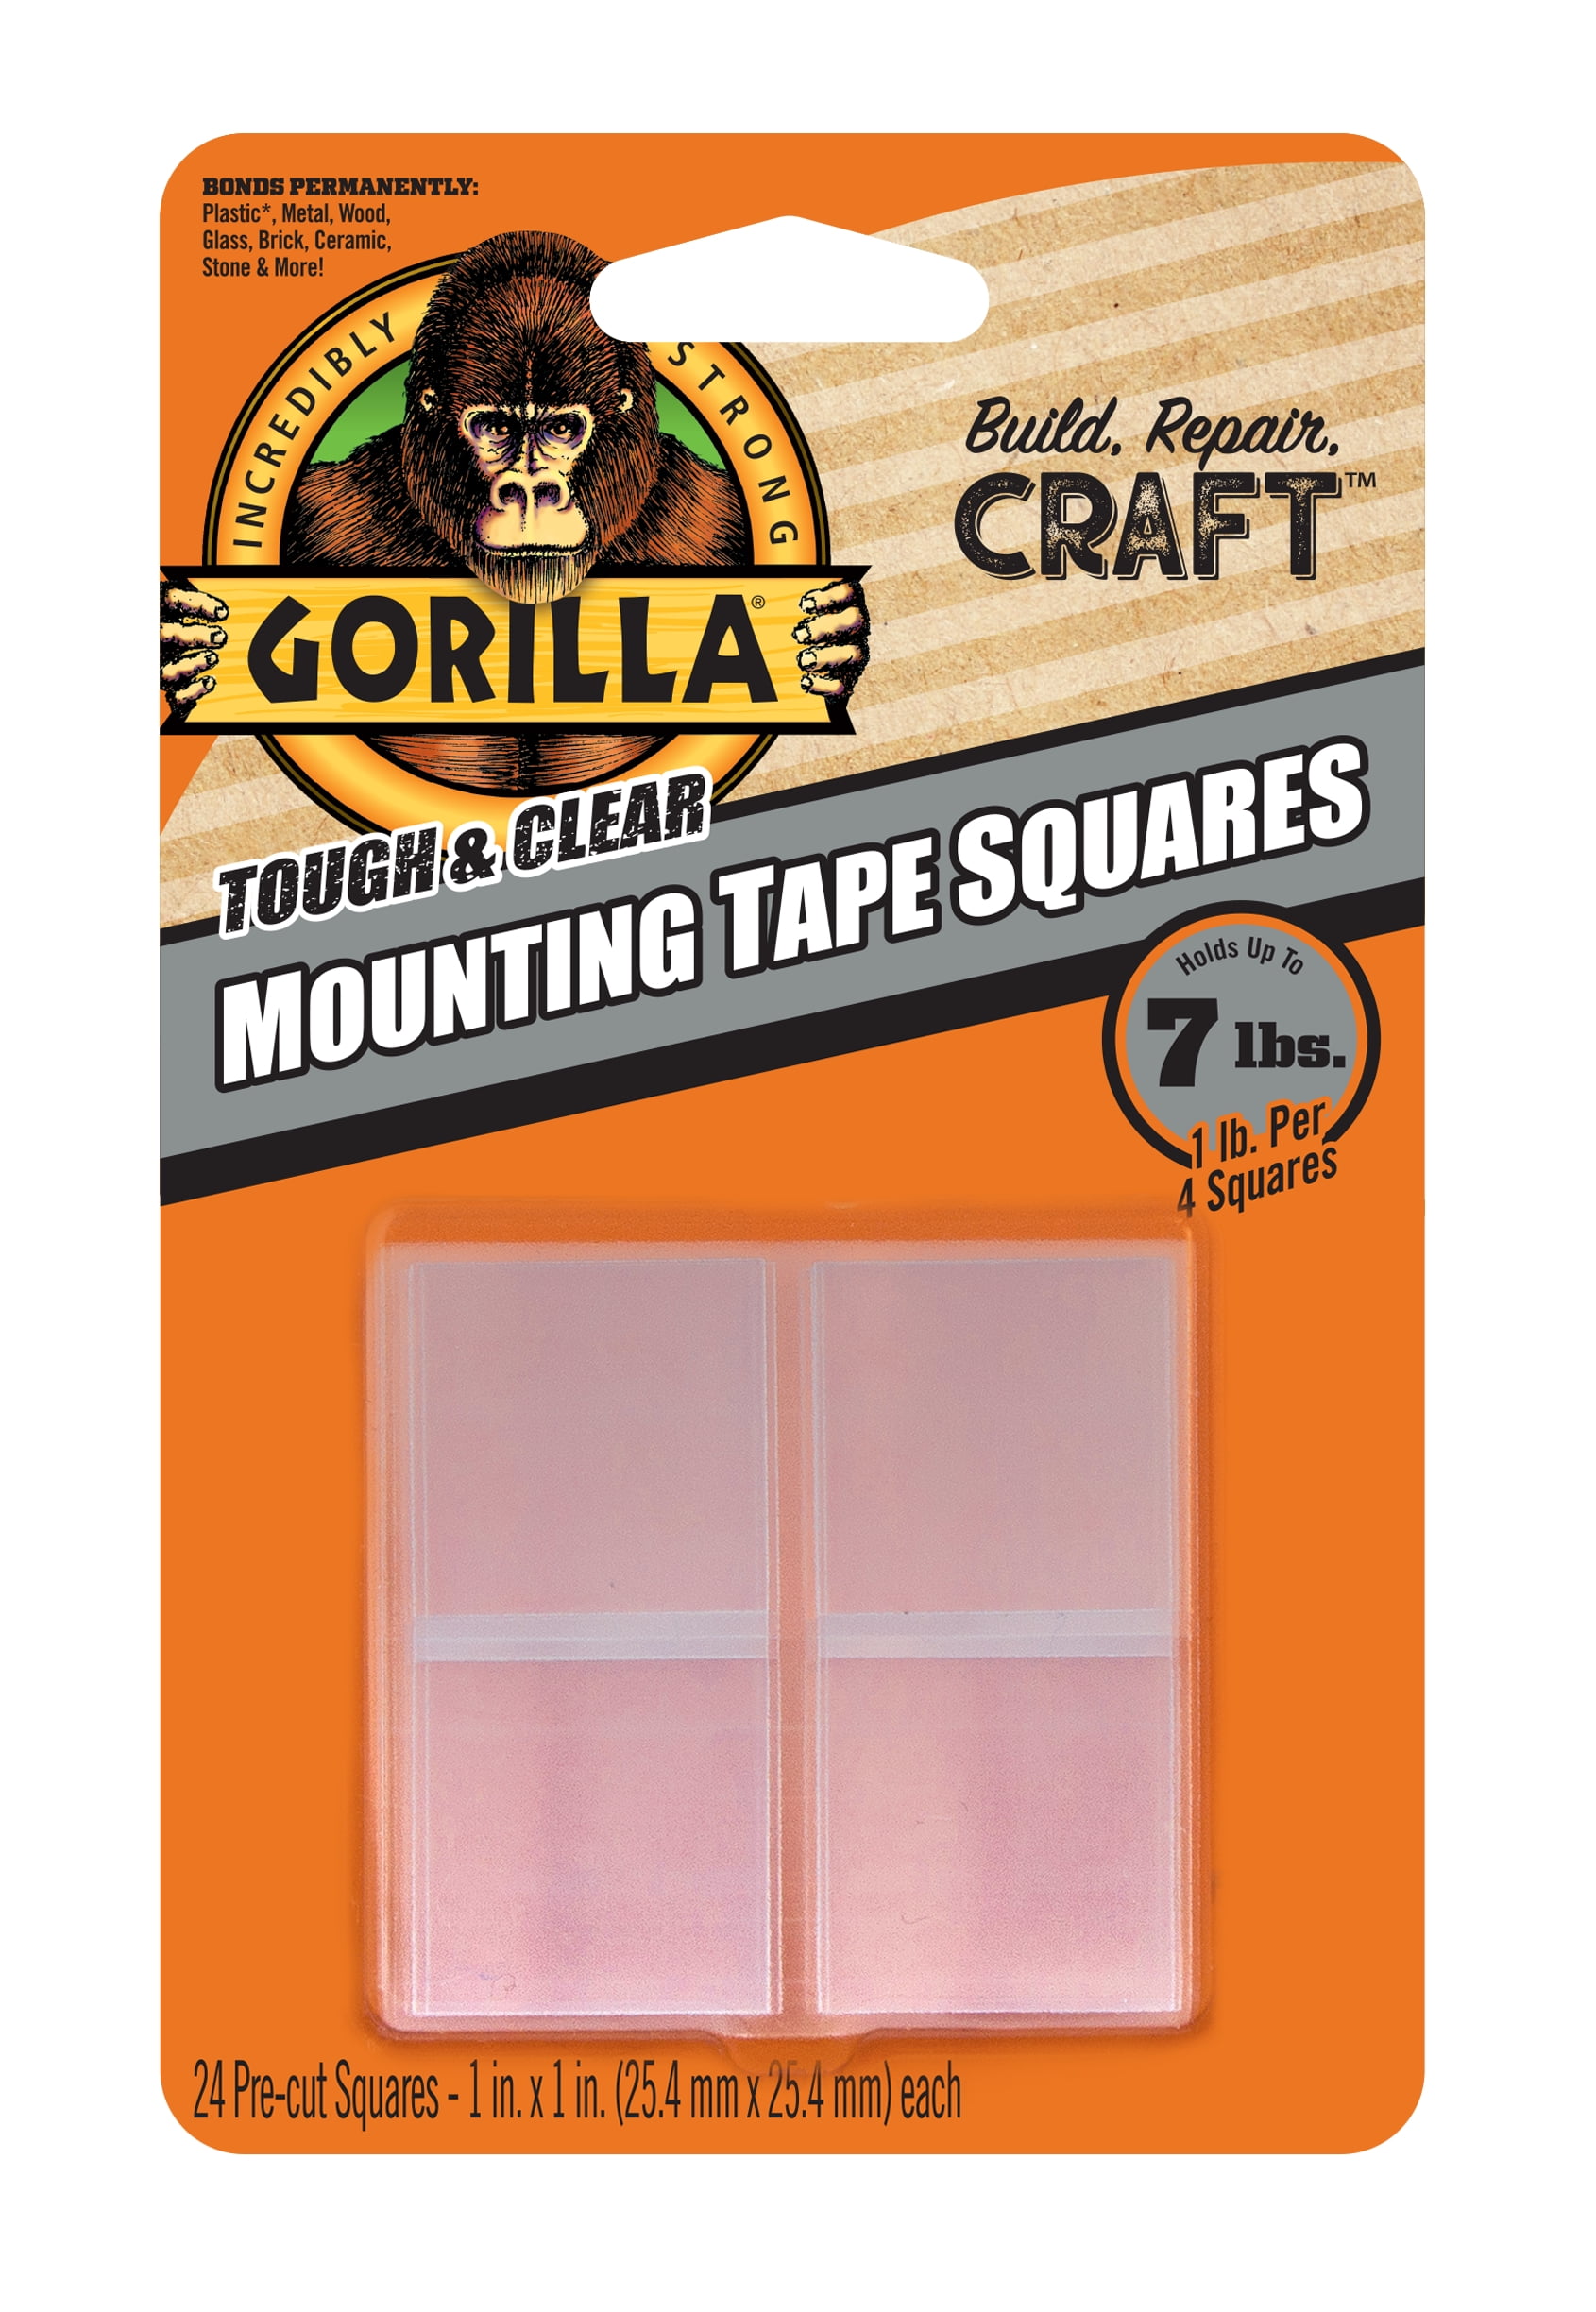 Gorilla Removable Mounting Putty, Off-White 